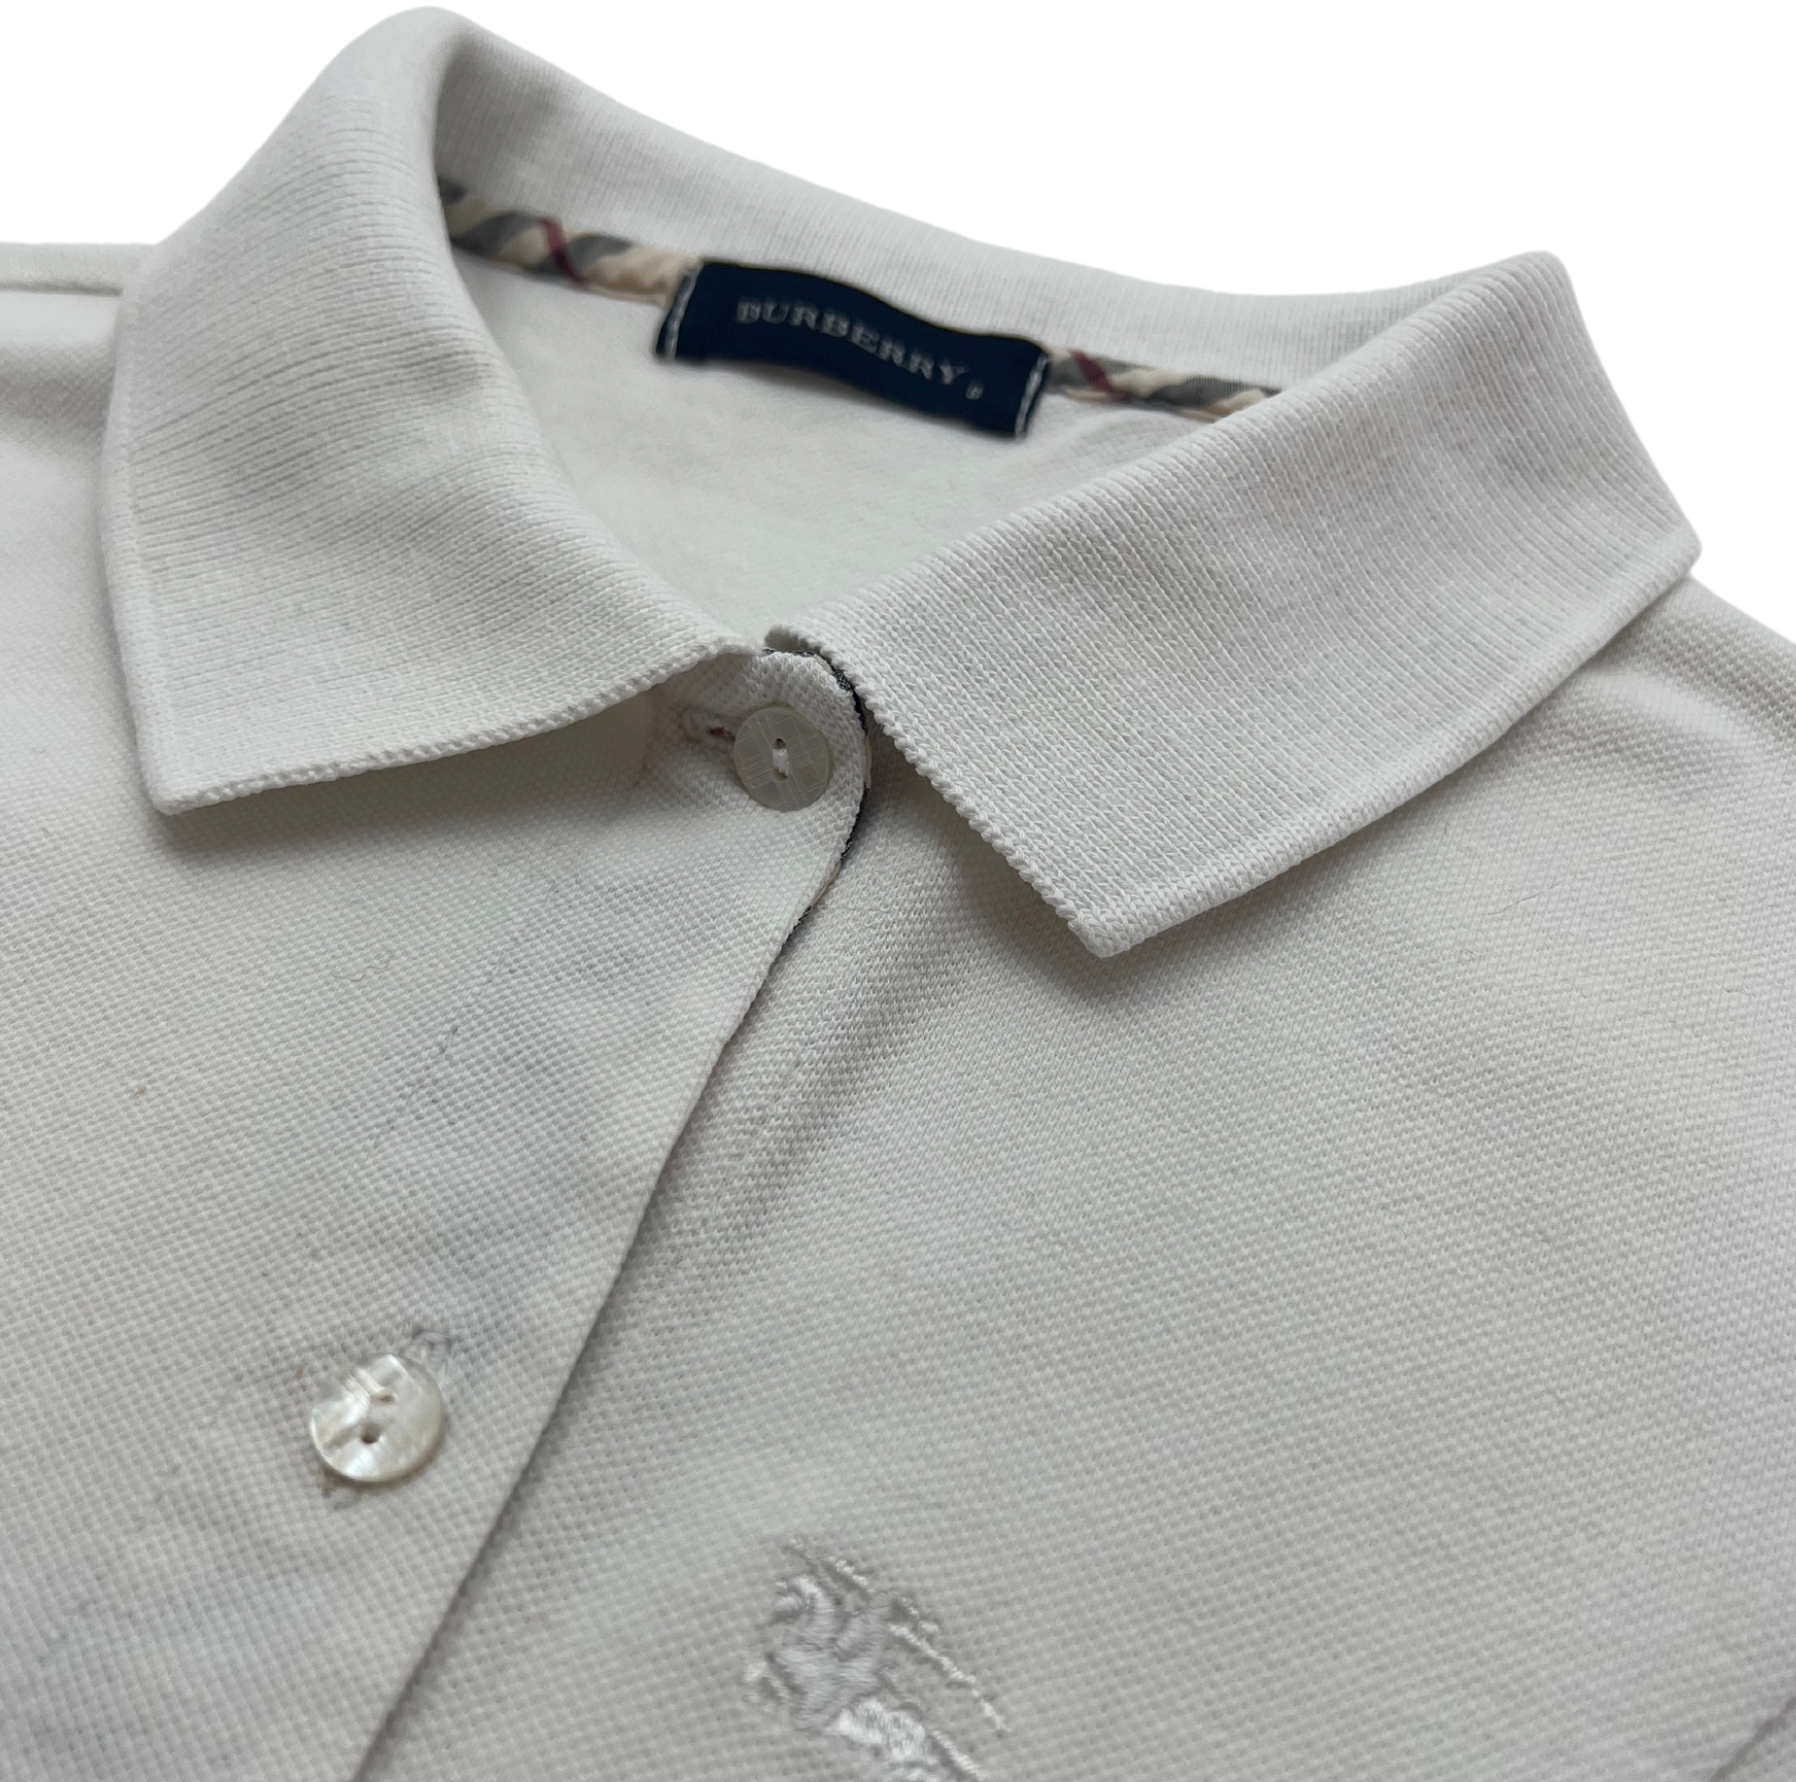 BURBERRY - White polo dress with vintage check - 8 years old